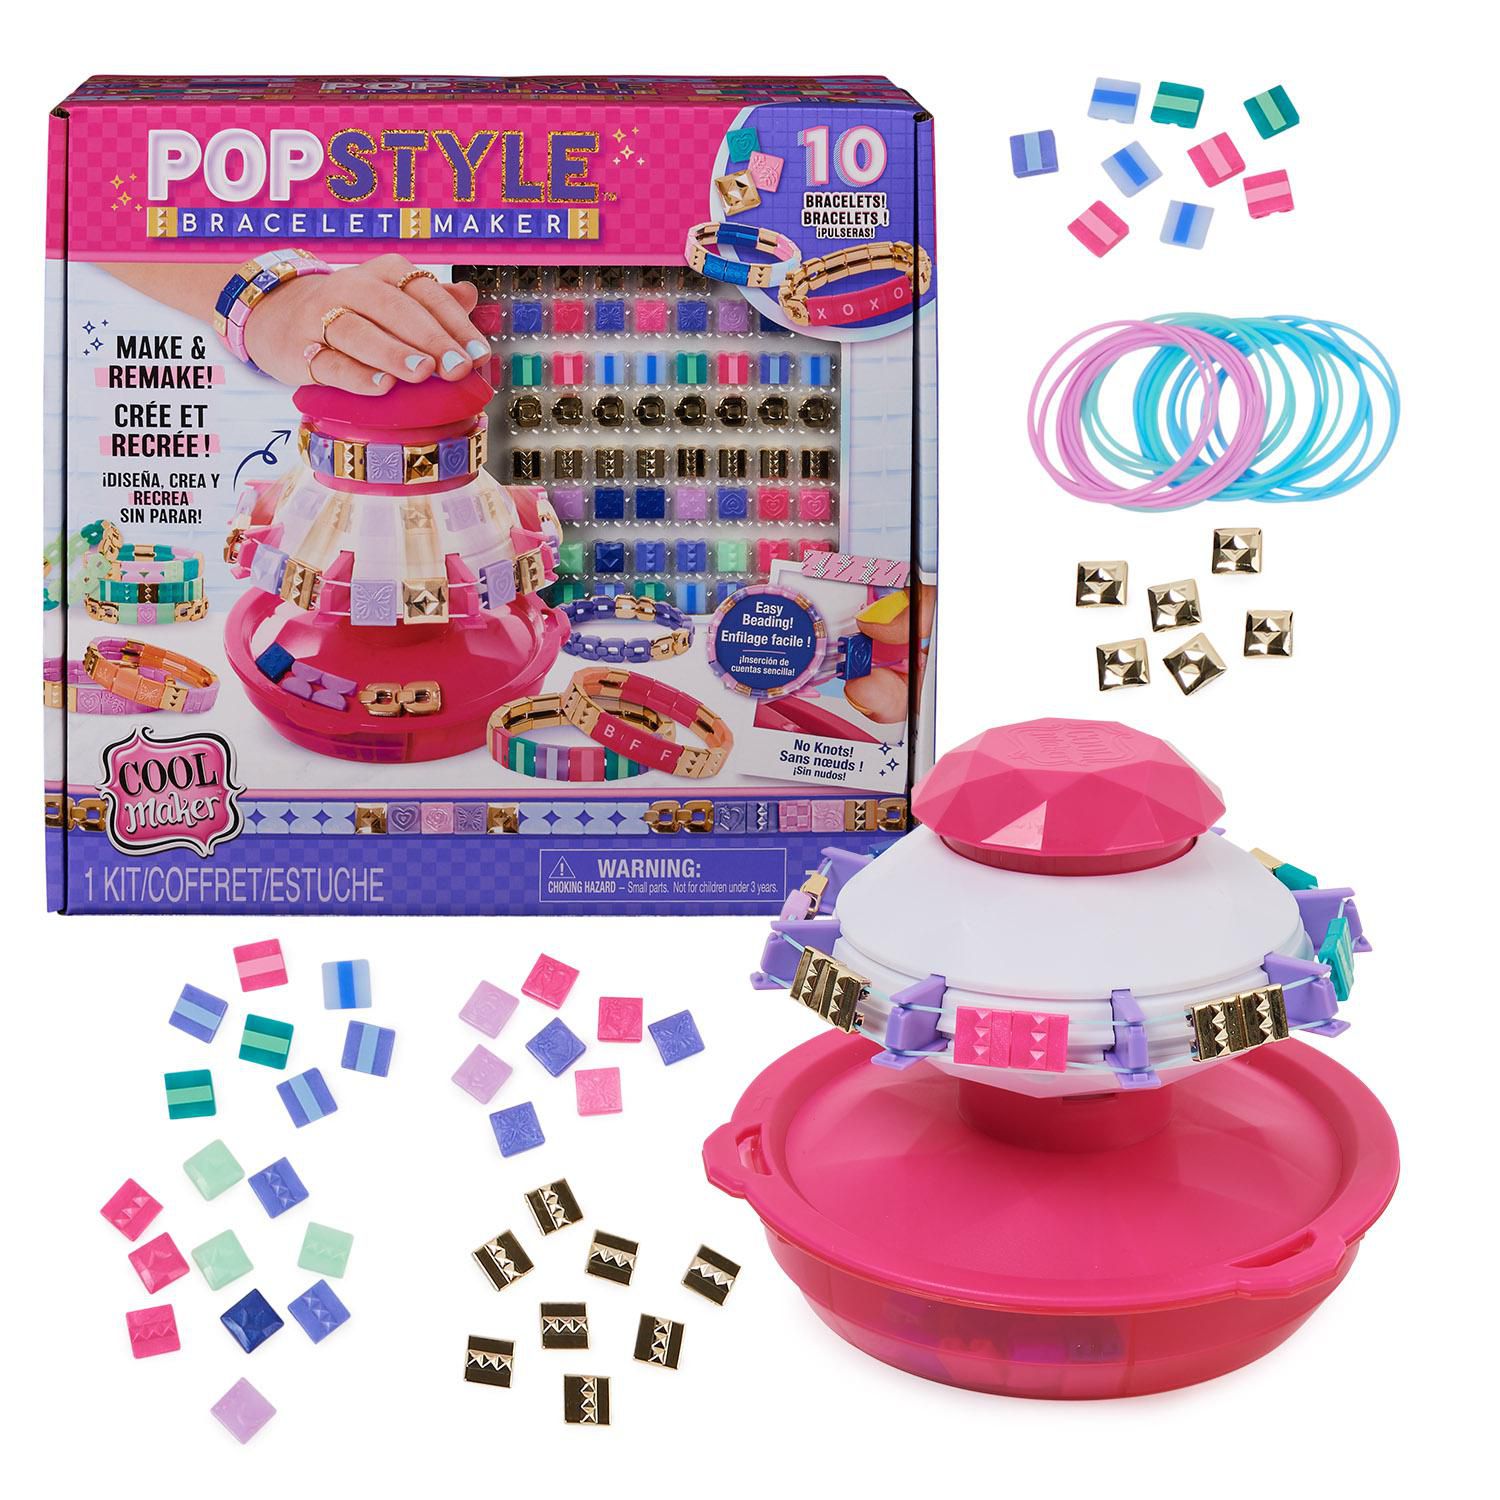 Cool Maker: creative kits for bracelets and nails